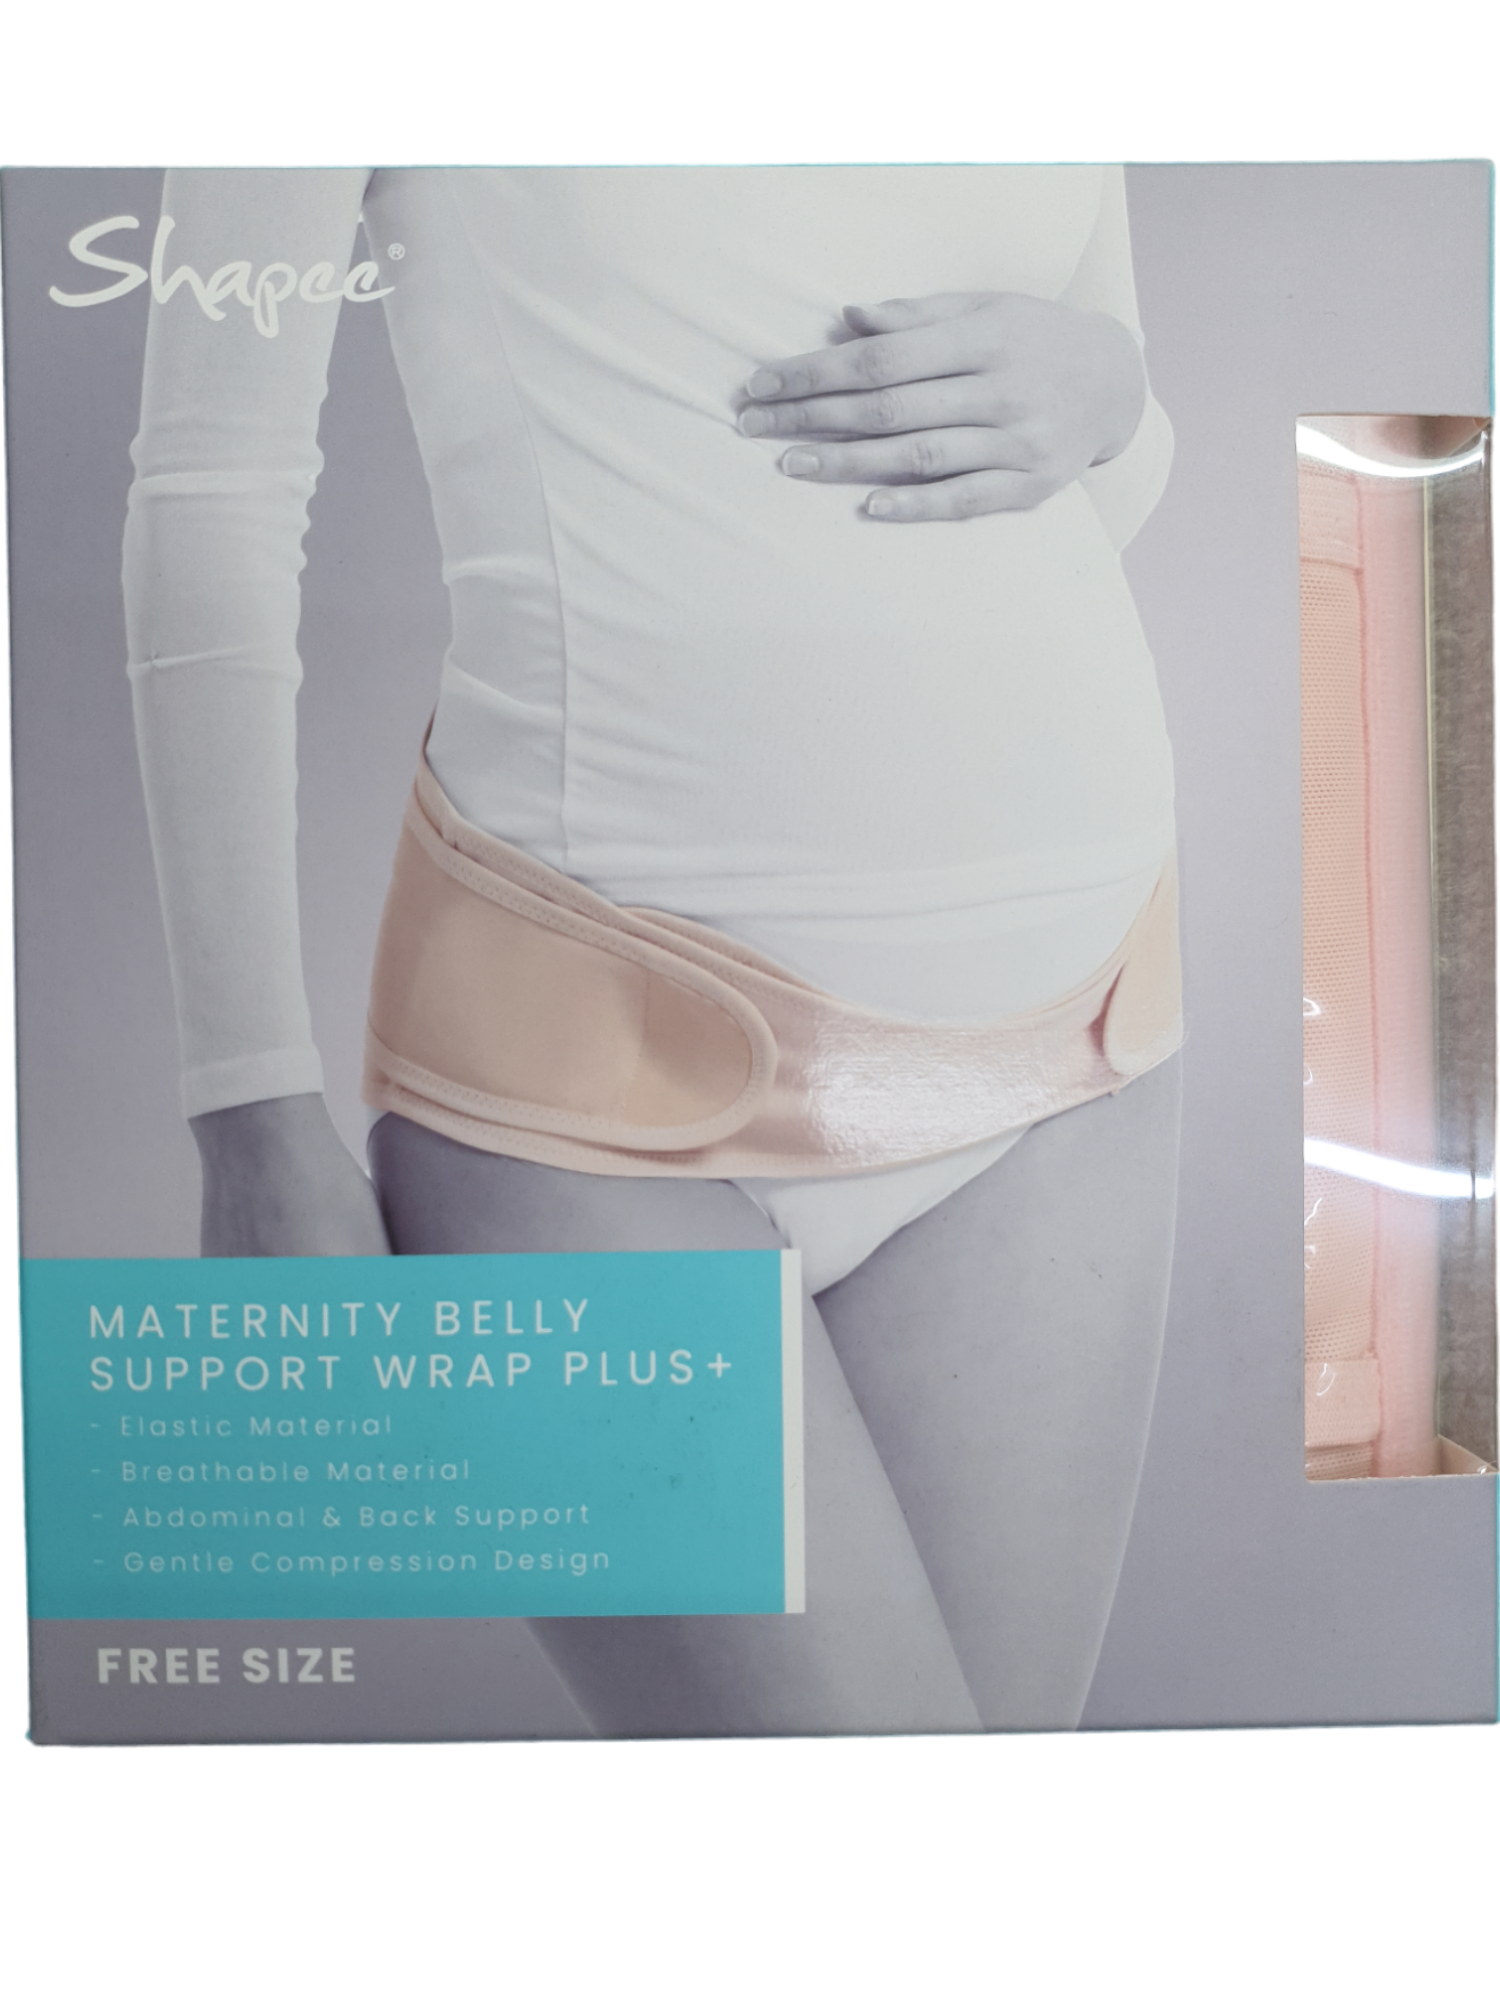 Shapee Maternity Belly Support Wrap Plus+ FREE SIZE Pink